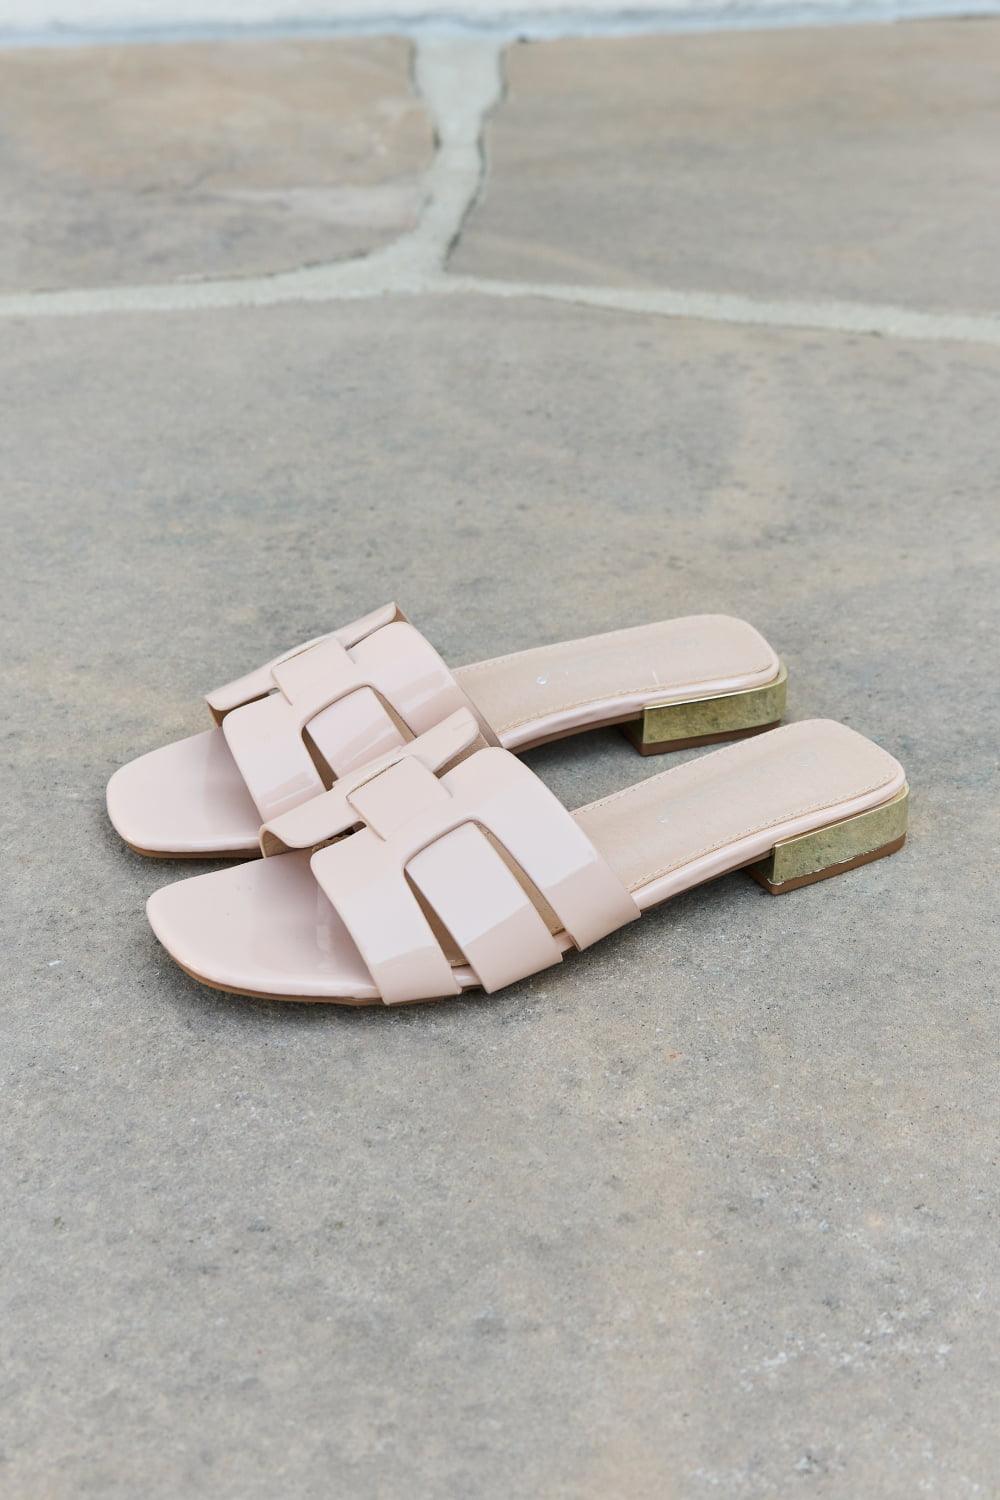 Weeboo Walk It Out Slide Sandals in Nude - CADEAUME